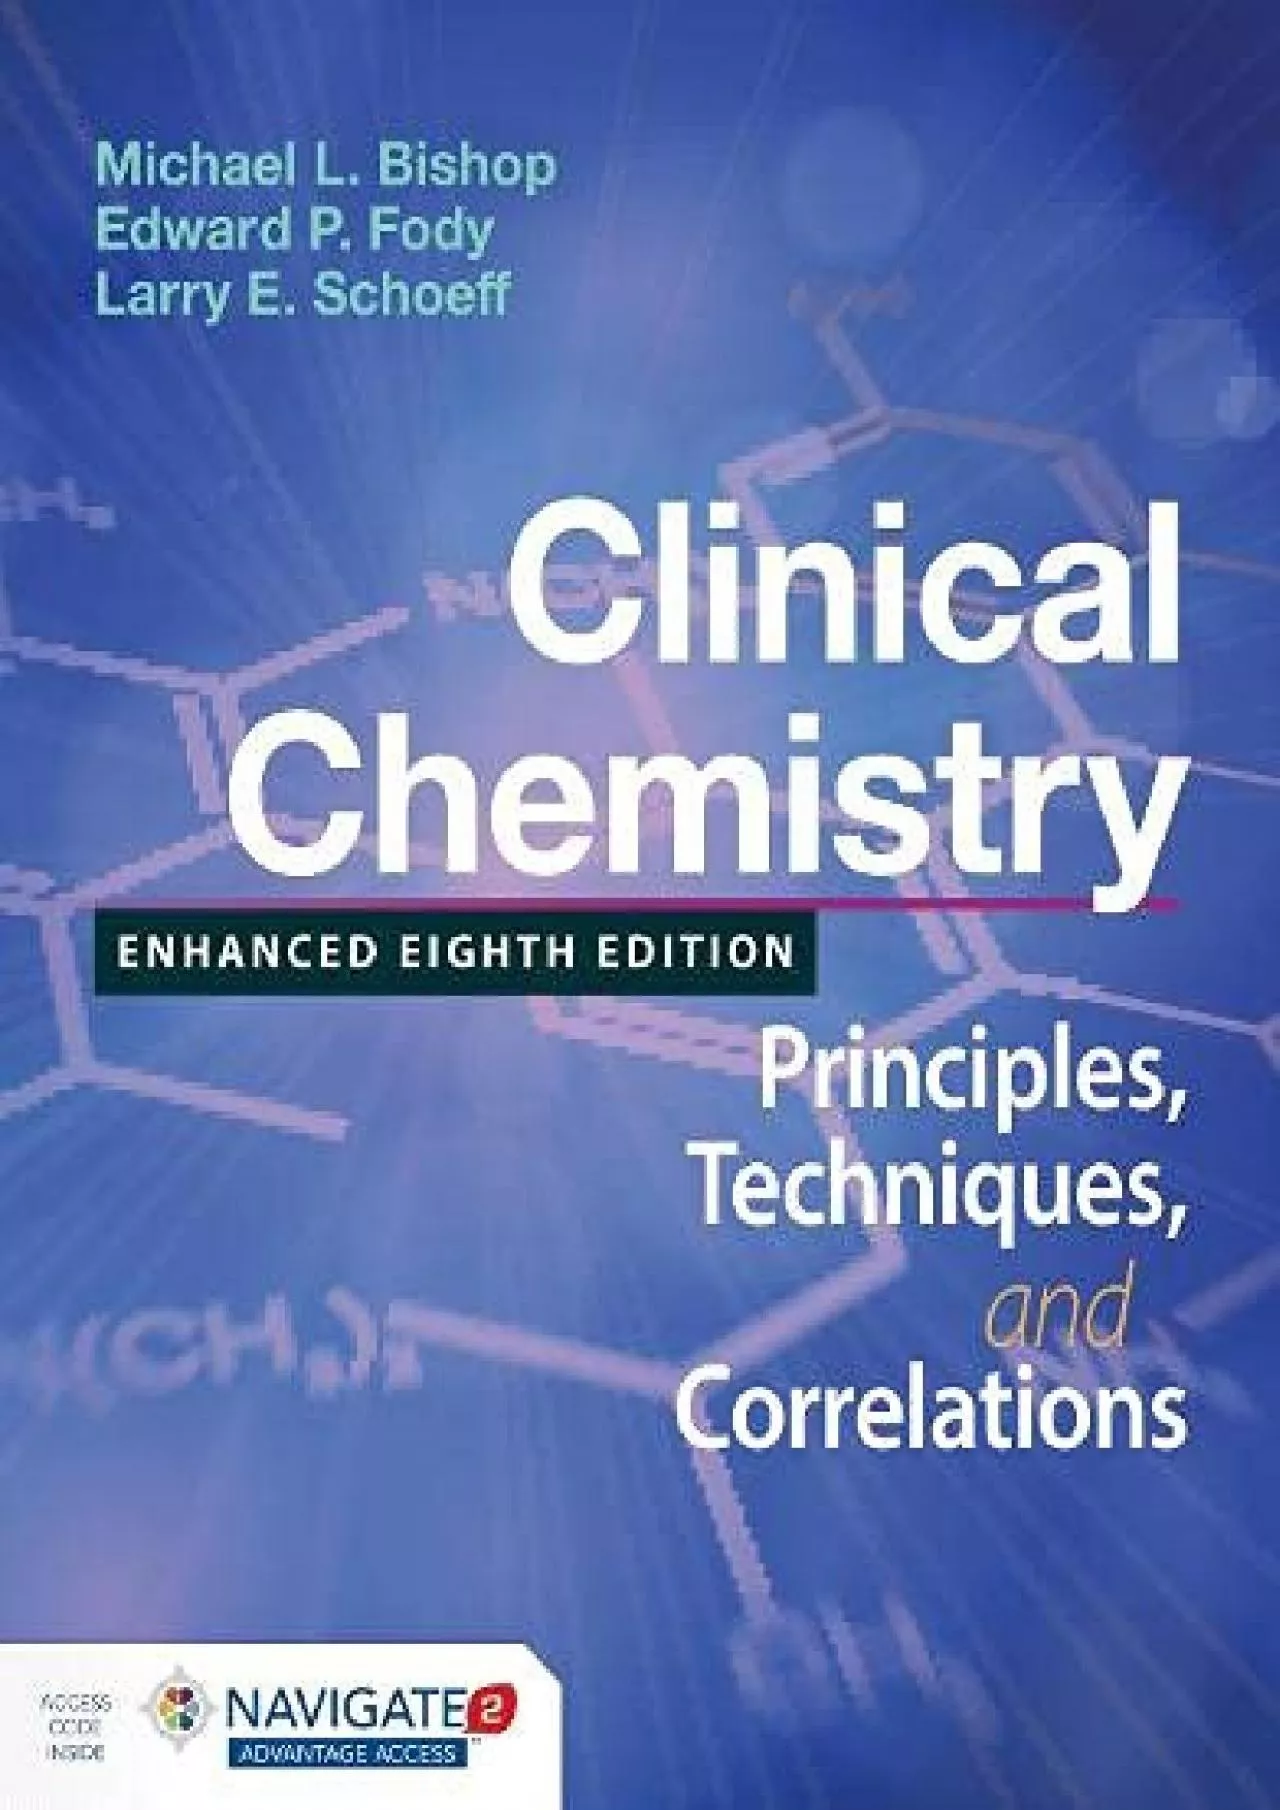 (DOWNLOAD)-Clinical Chemistry: Principles, Techniques, and Correlations, Enhanced Edition: